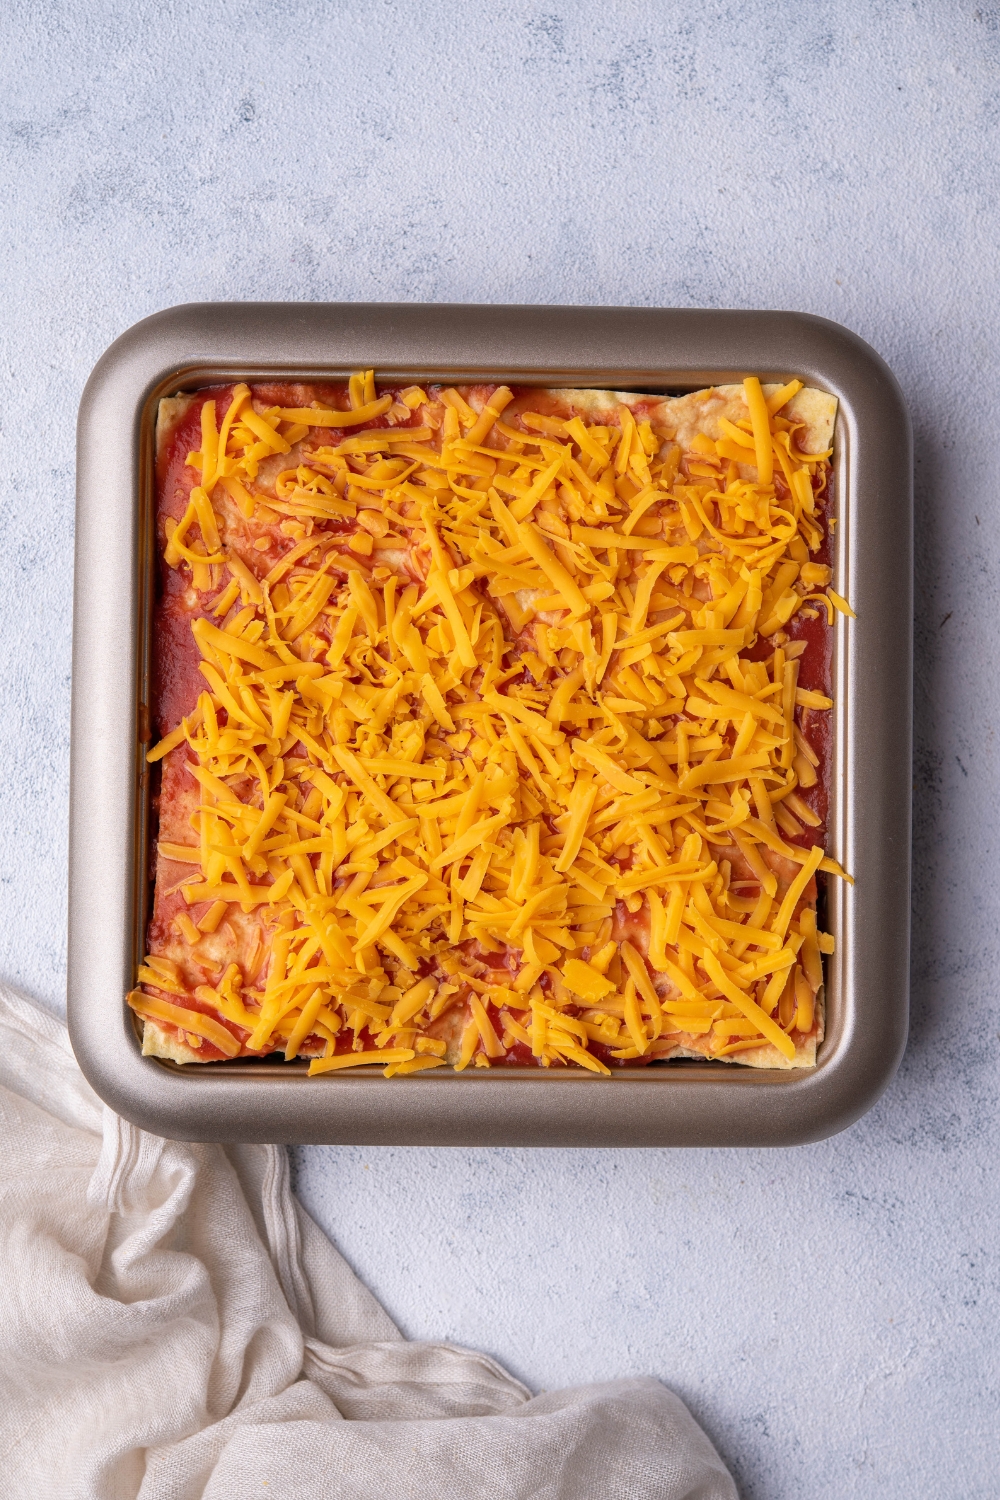 A bunch of shredded cheddar cheese on top of red enchilada sauce on an enchilada casserole and a baking dish.